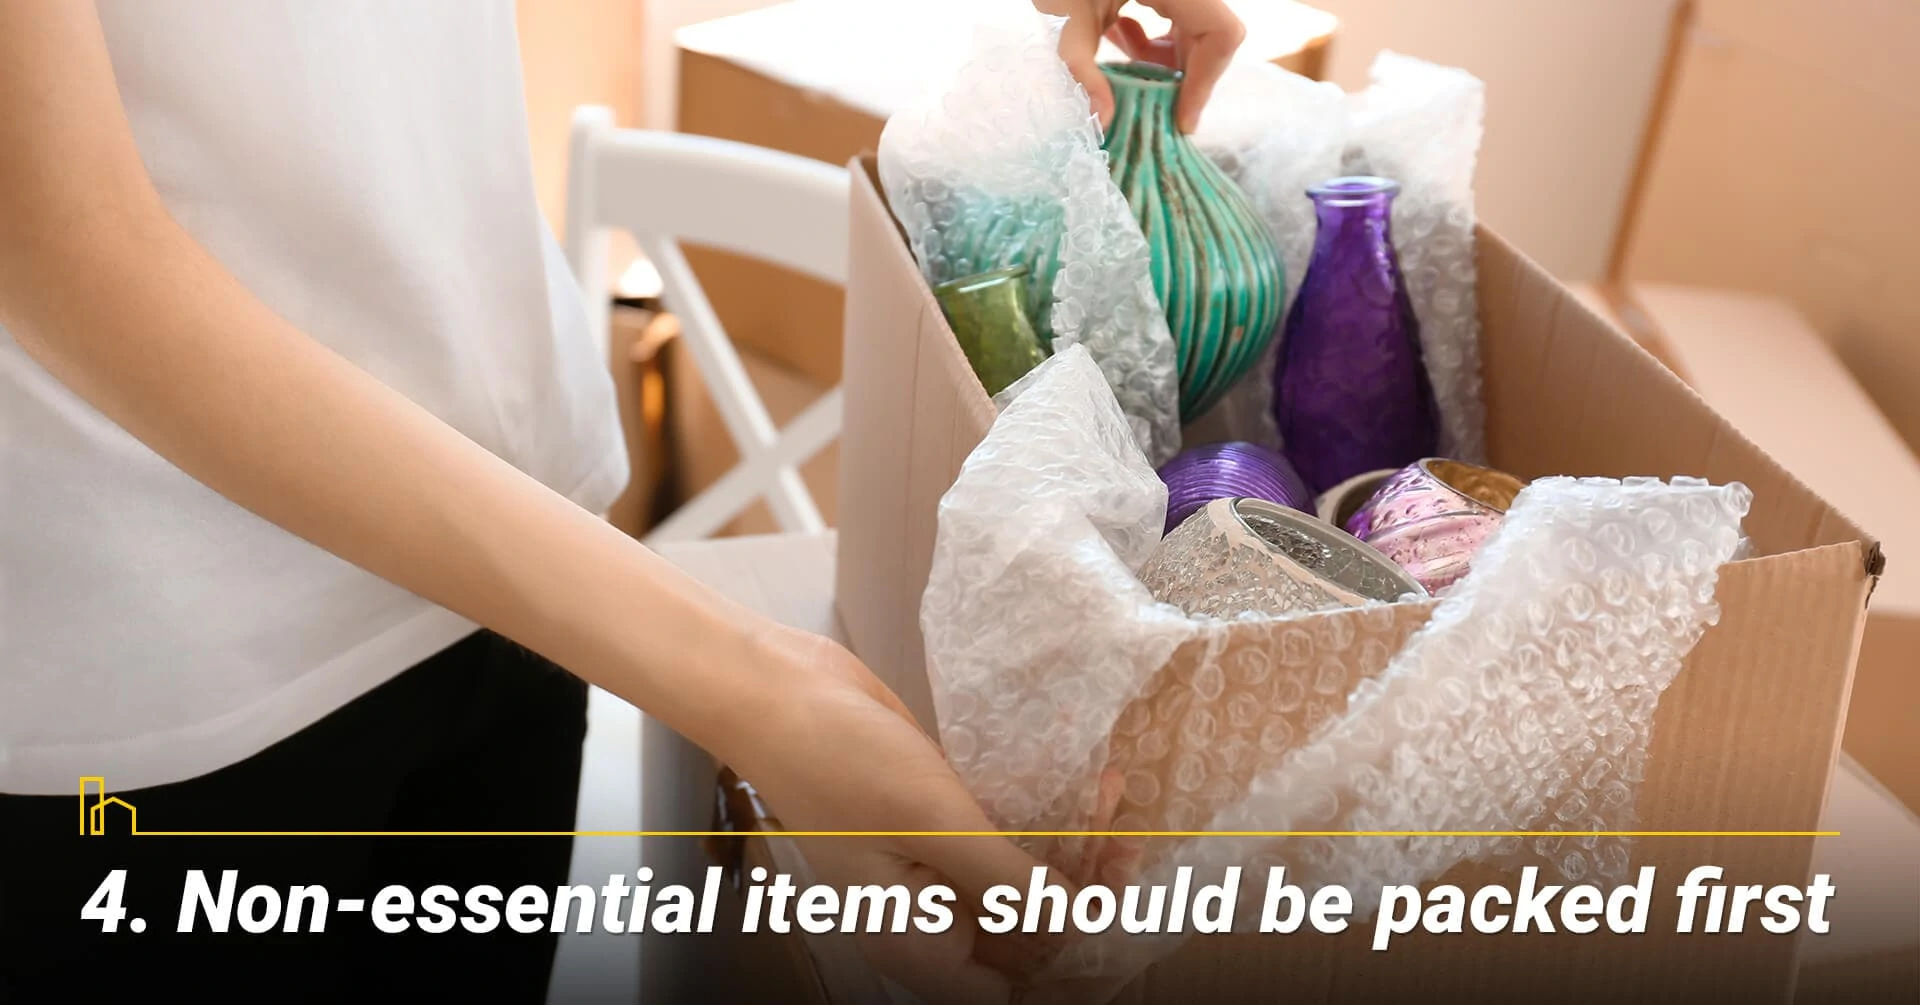 Non-essential items should be packed first, pack less frequently used items first